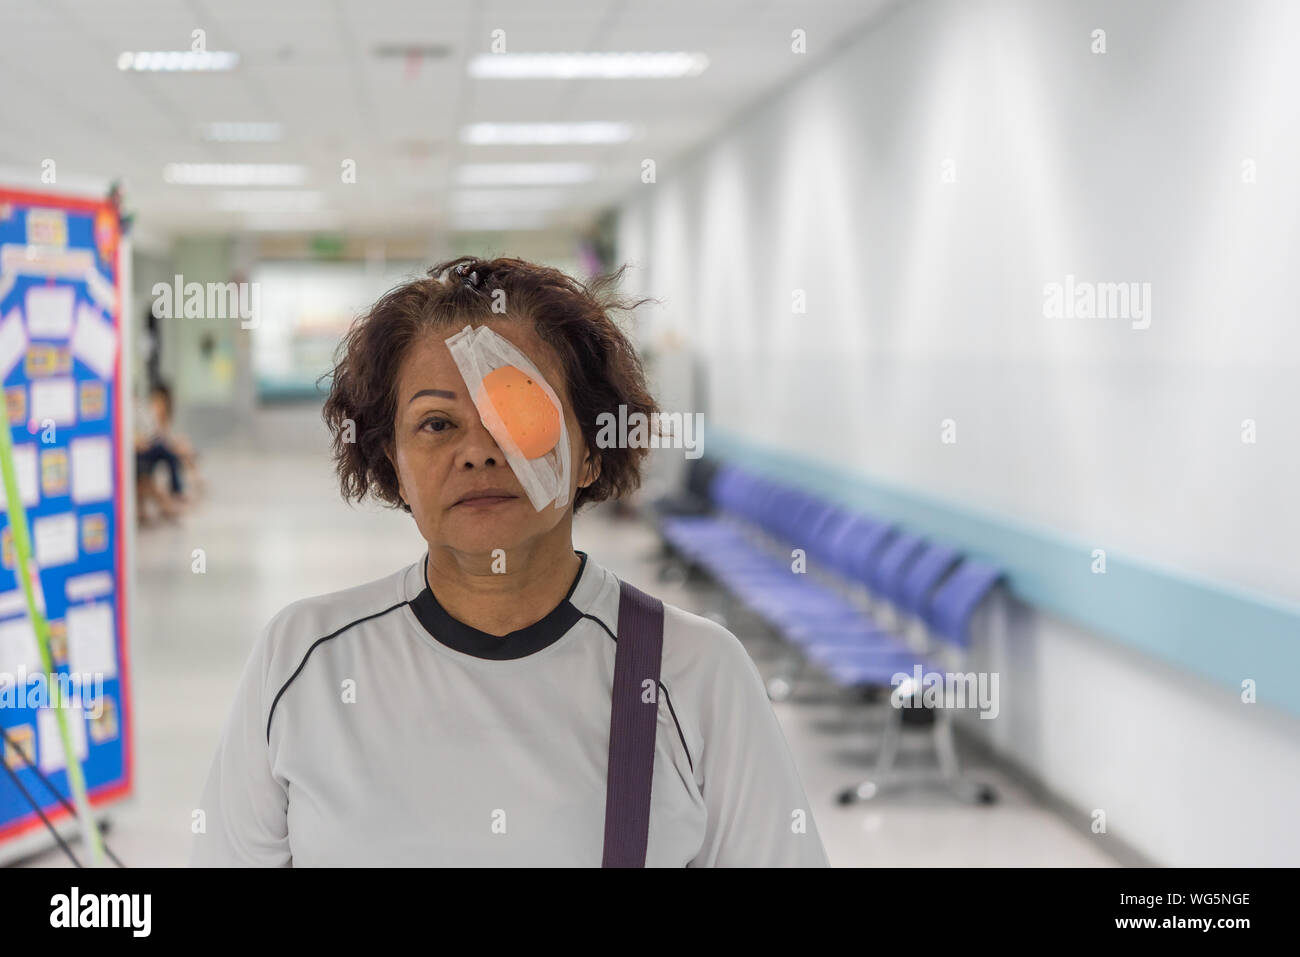 Portrait Of Senior Woman With Medical Eye Patch Standing At Hospital Stock Photo